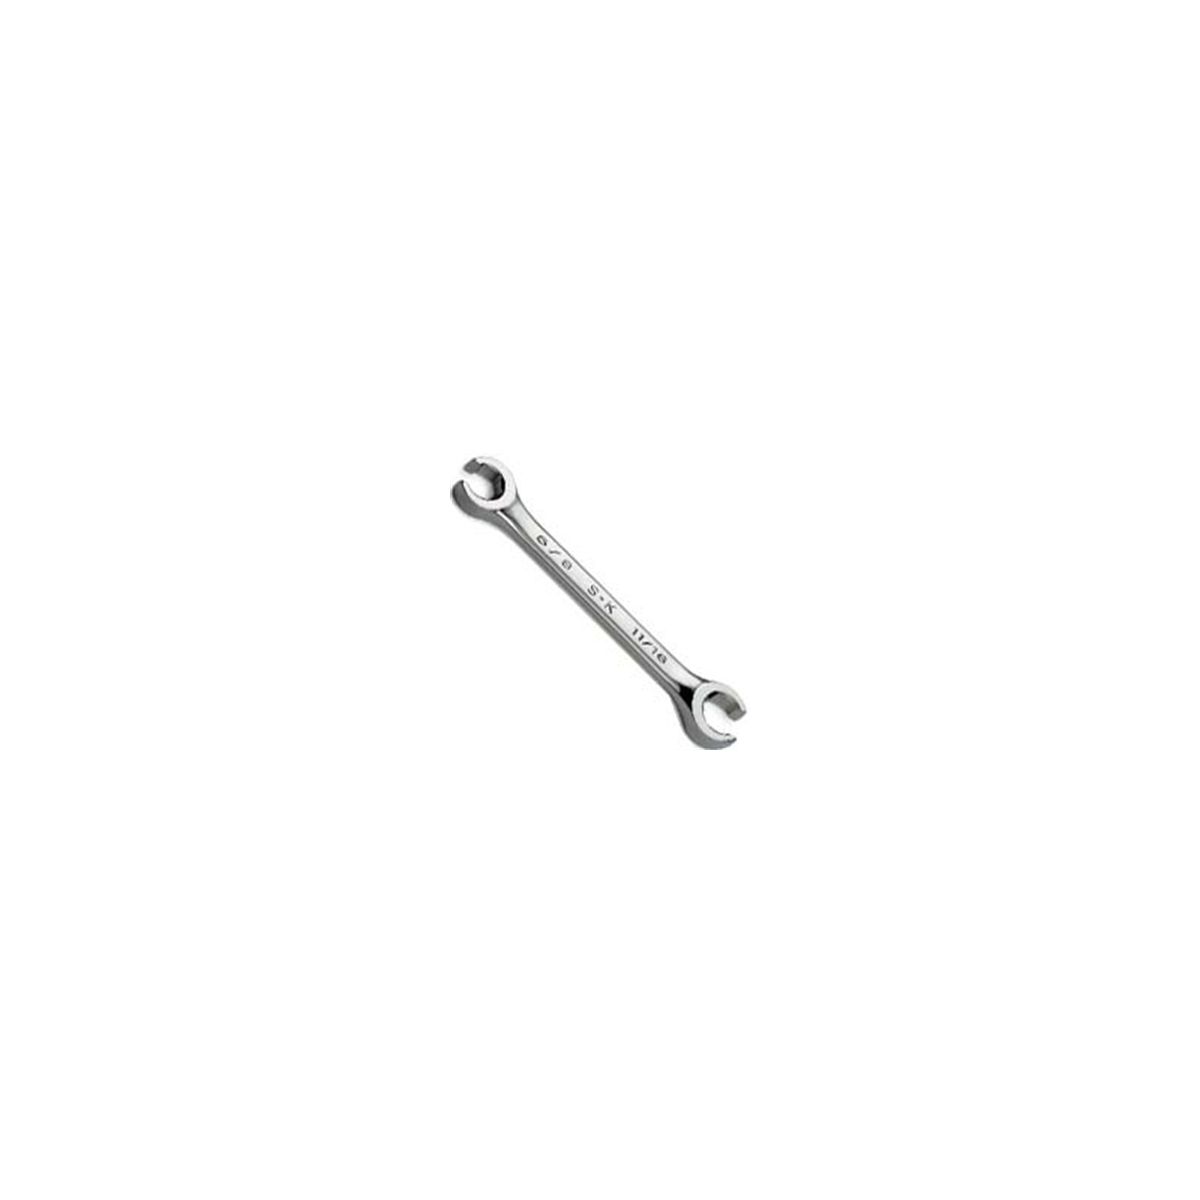 SuperKrome(R) Metric Flare Nut Wrench - 13mm x 14mm